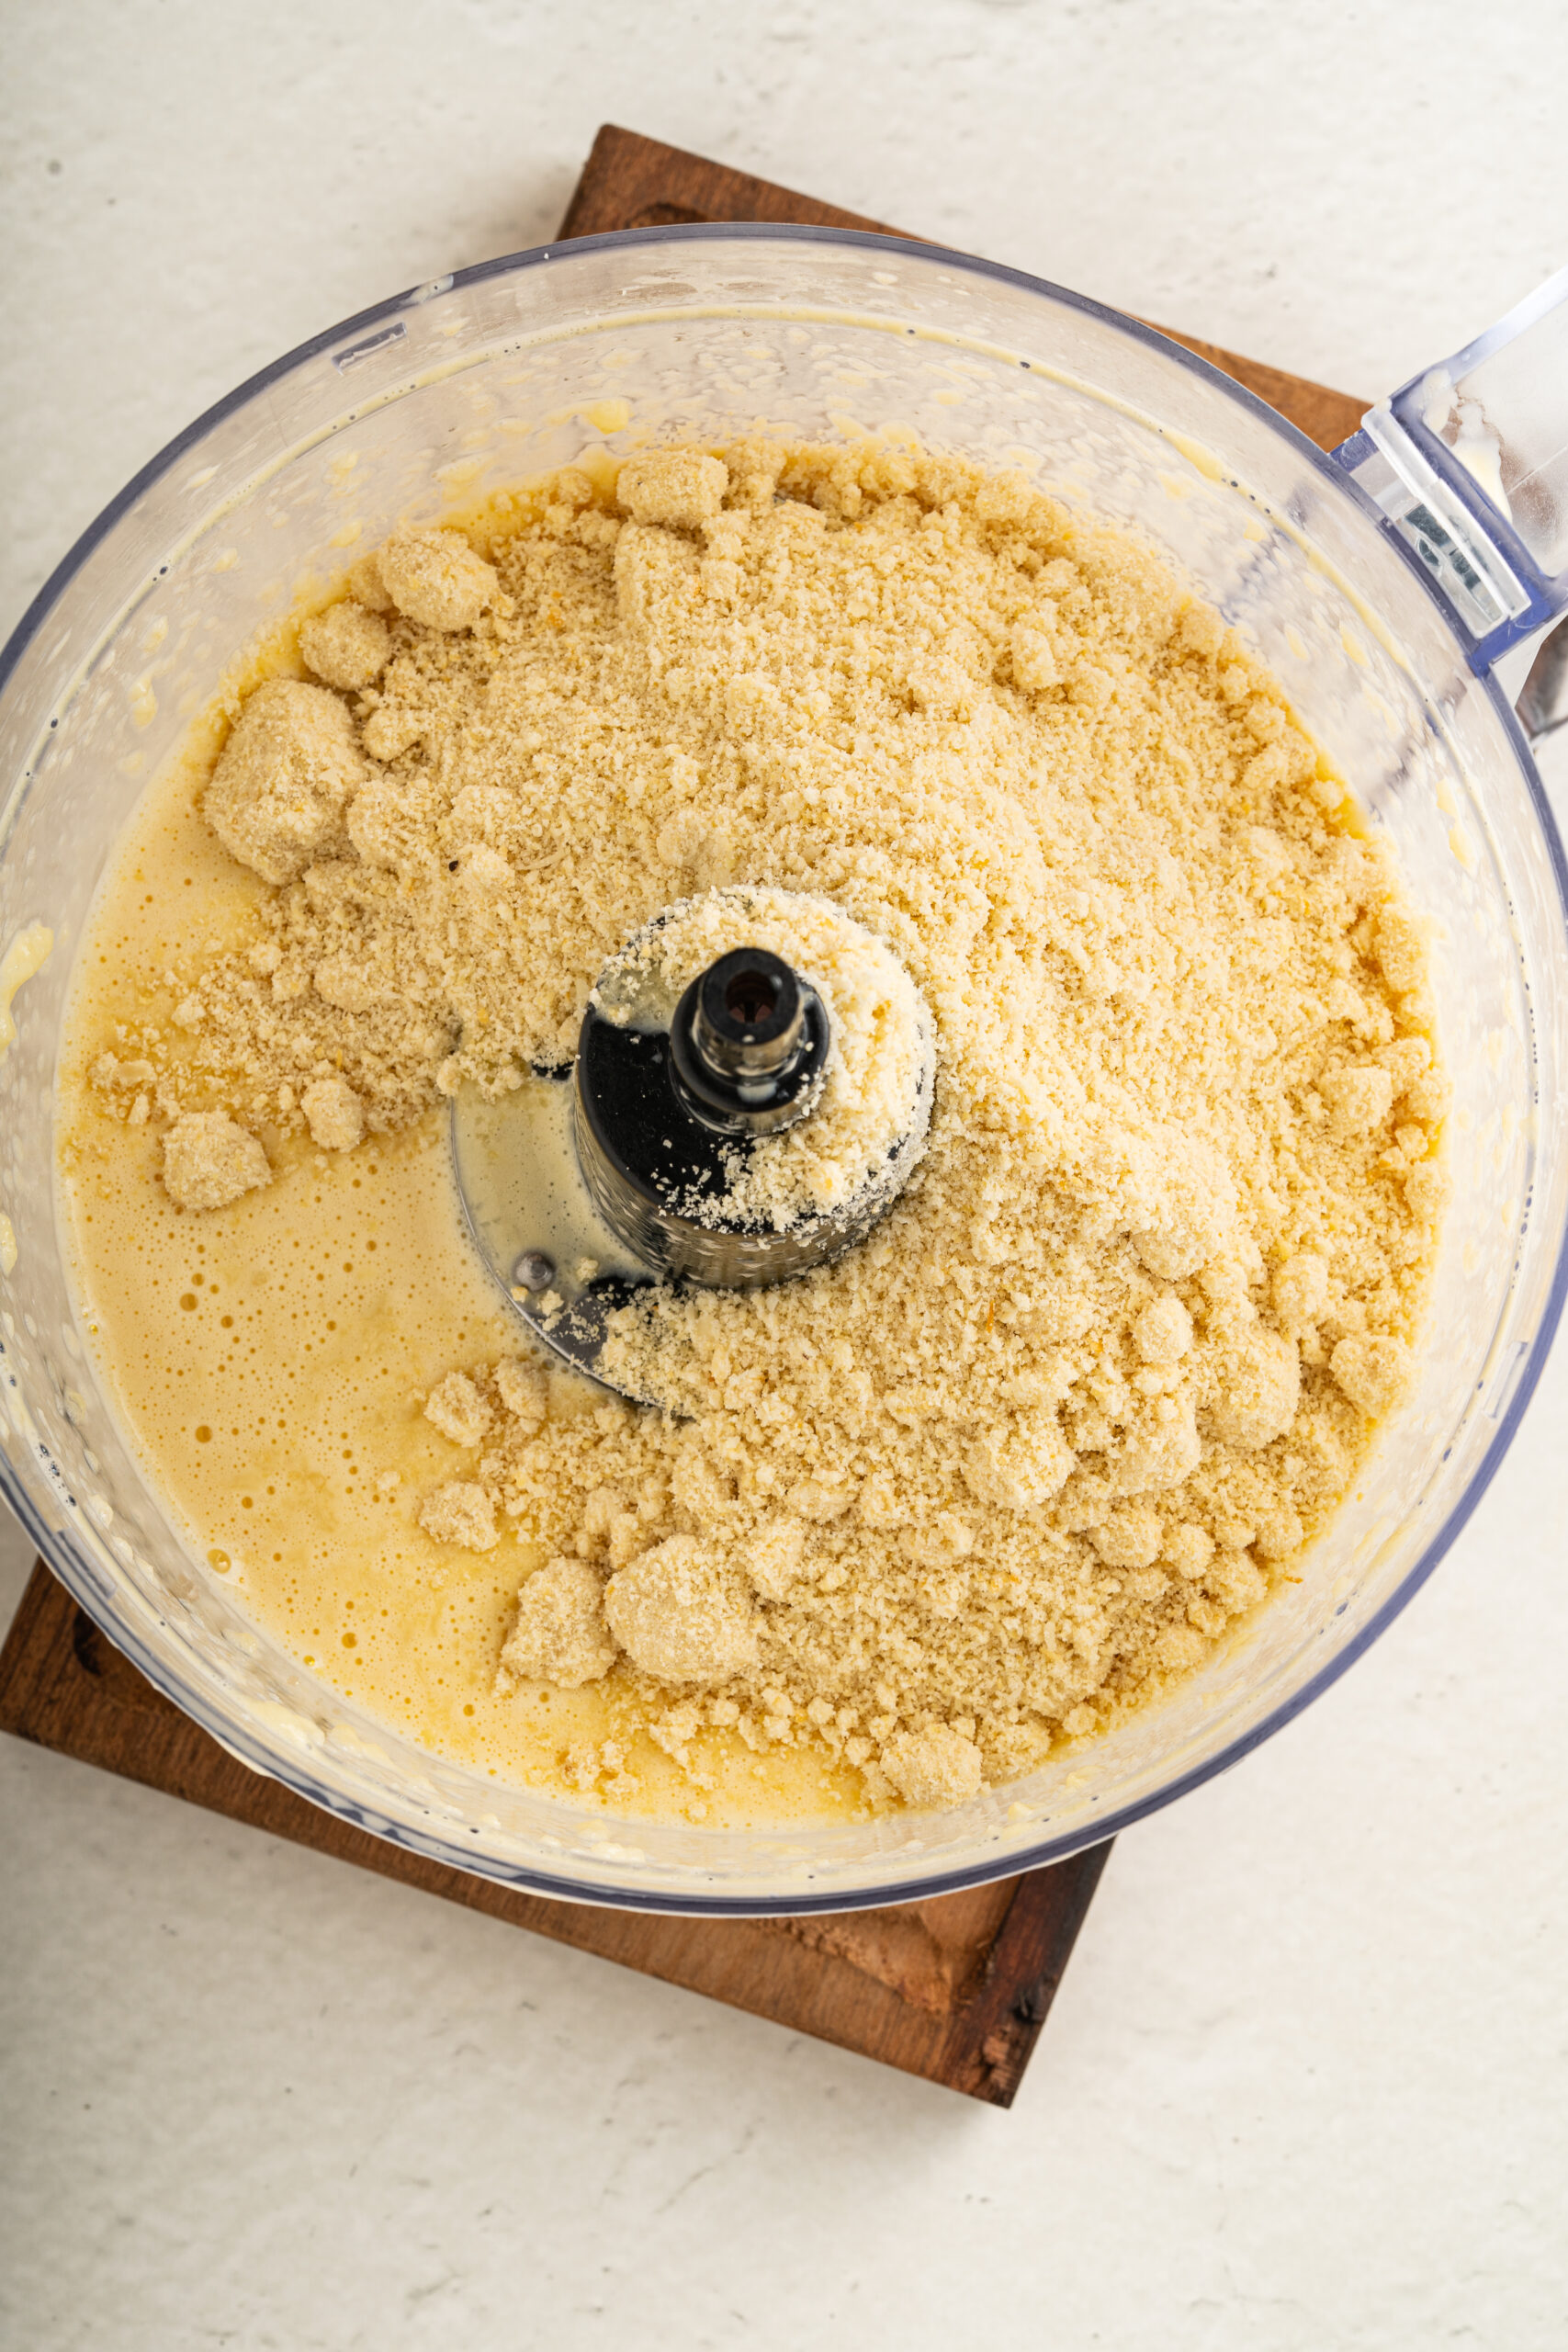 Wet and dry ingredients or low carb rolls in a food processor.